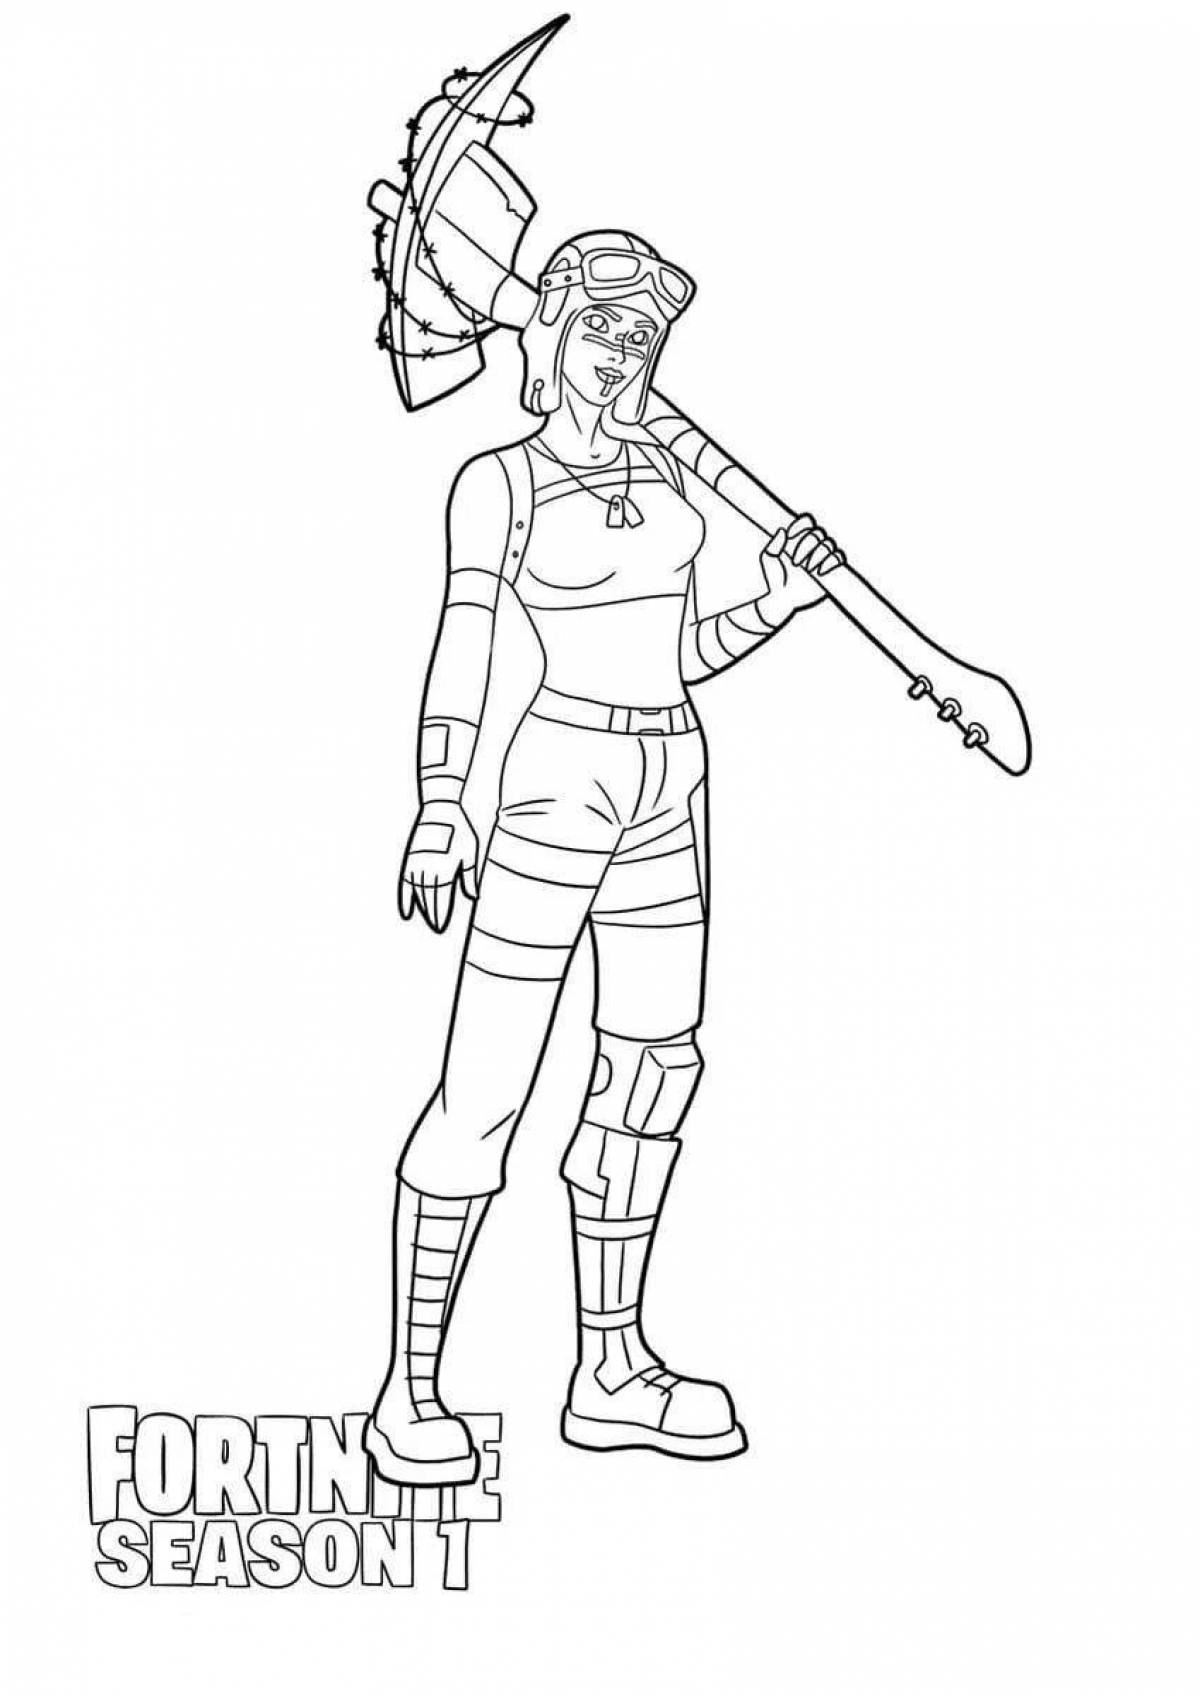 Radiant combat fortnite coloring page